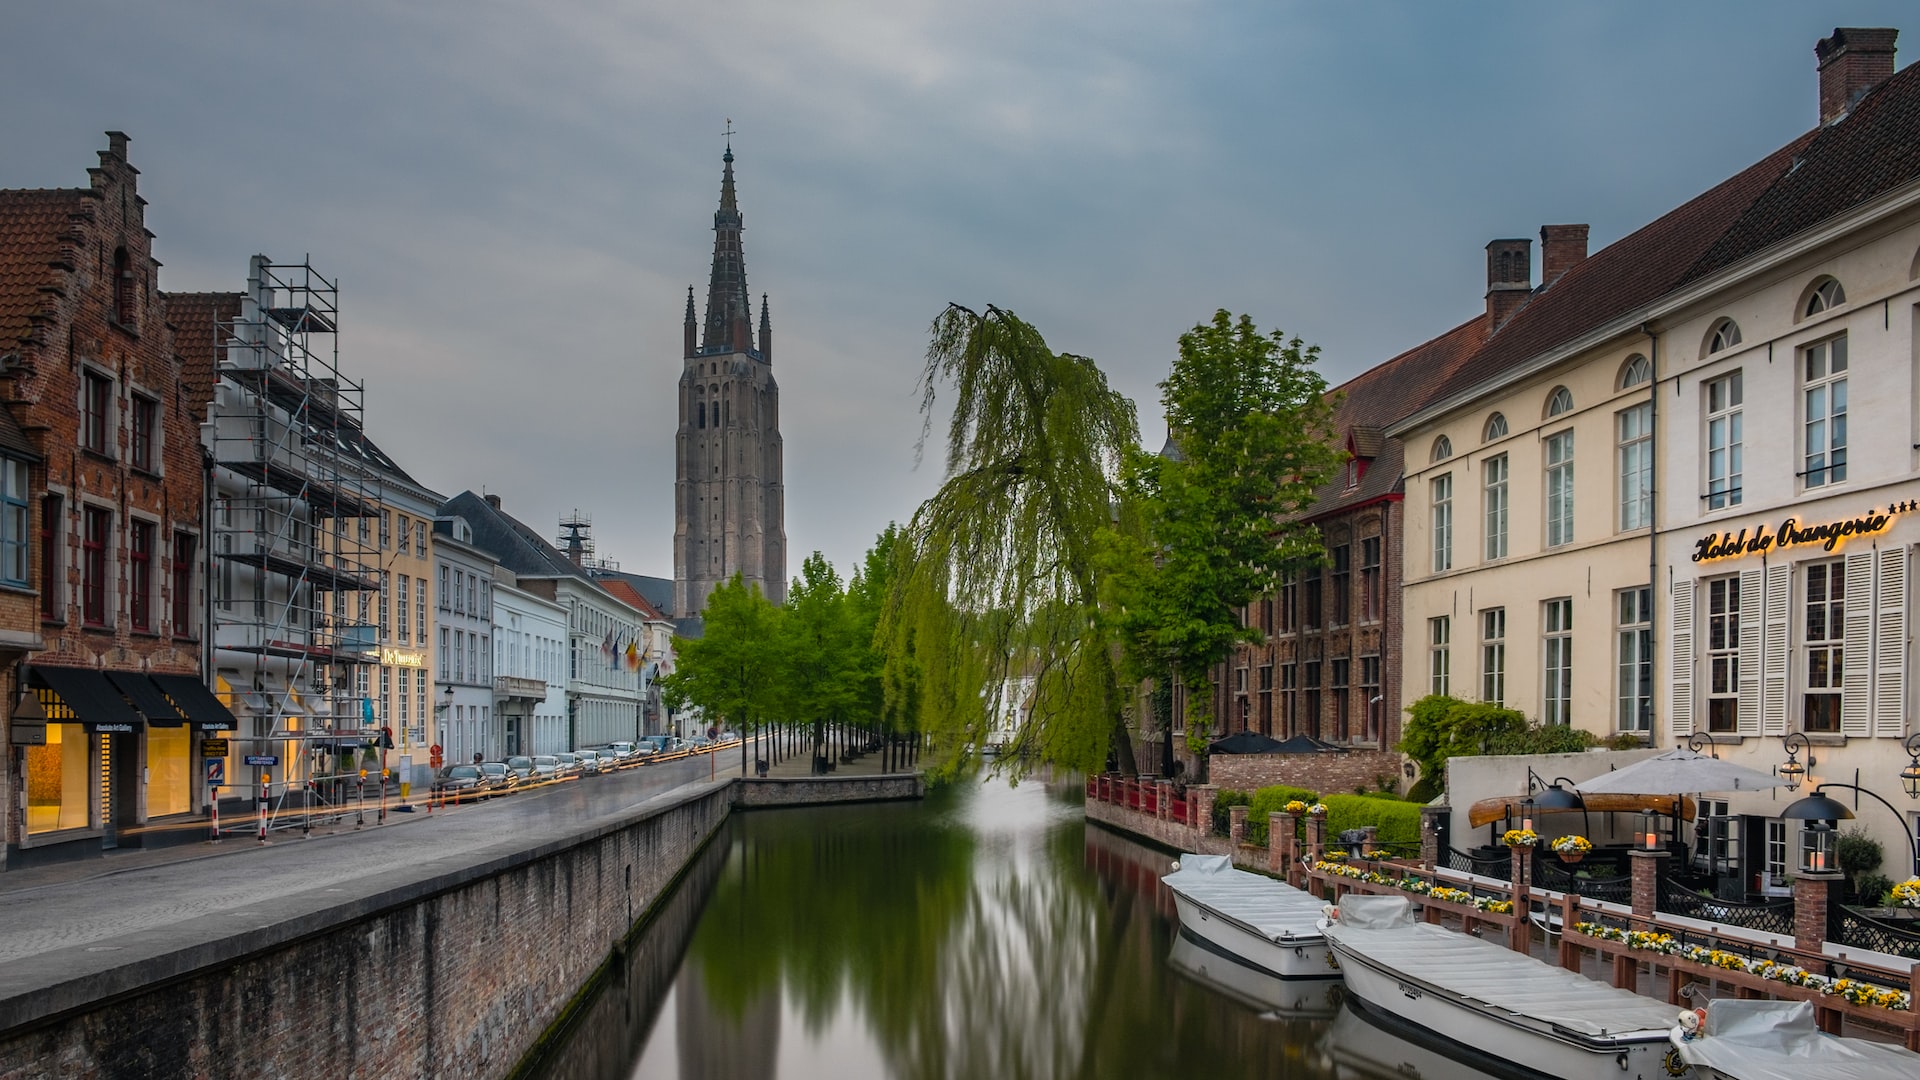 20 Fascinating Facts About Belgium: History, Culture to Delicious Cuisine, Landscapes